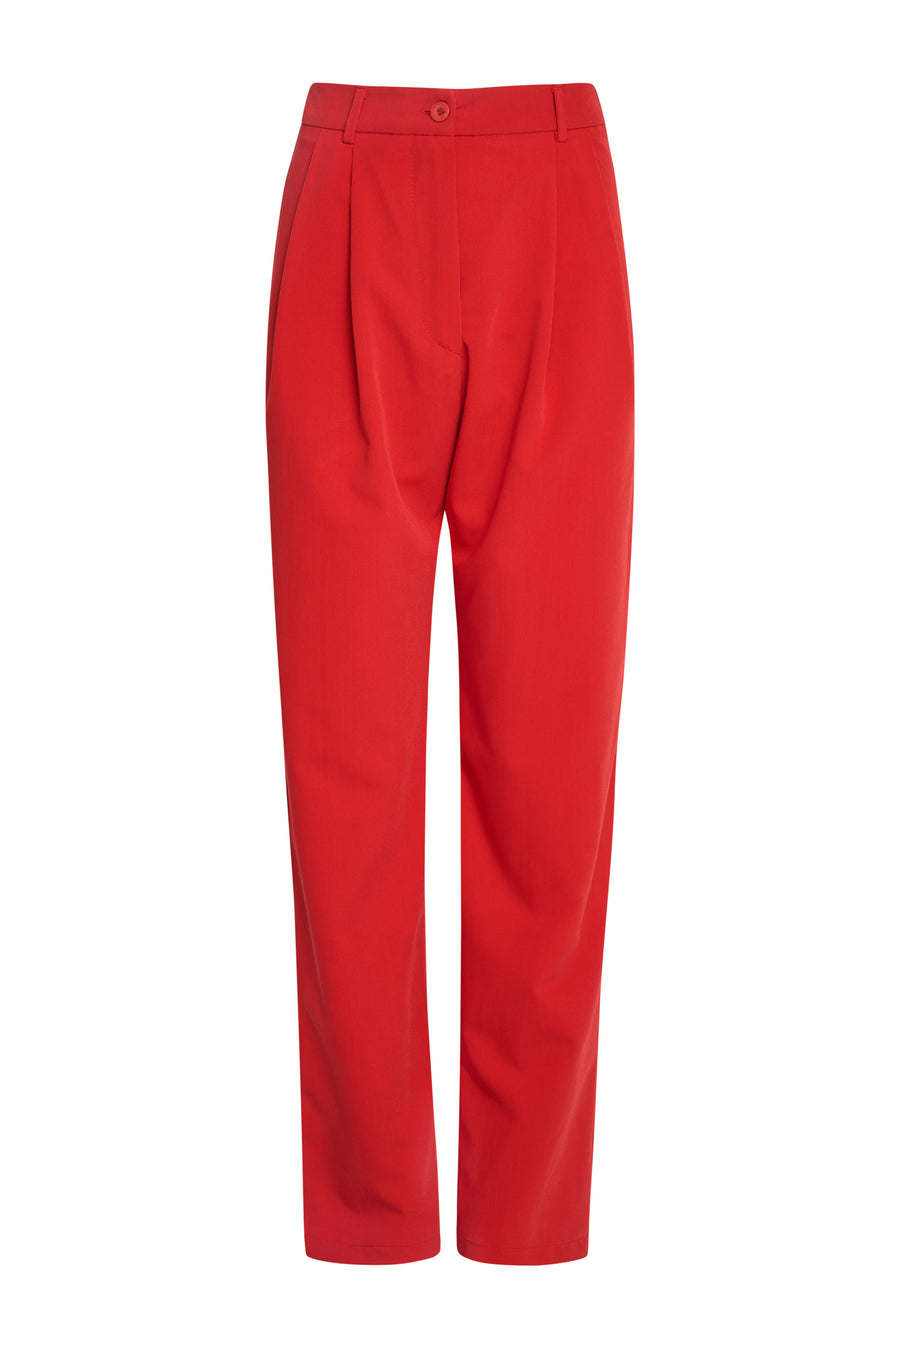 Janet Pants (Red)